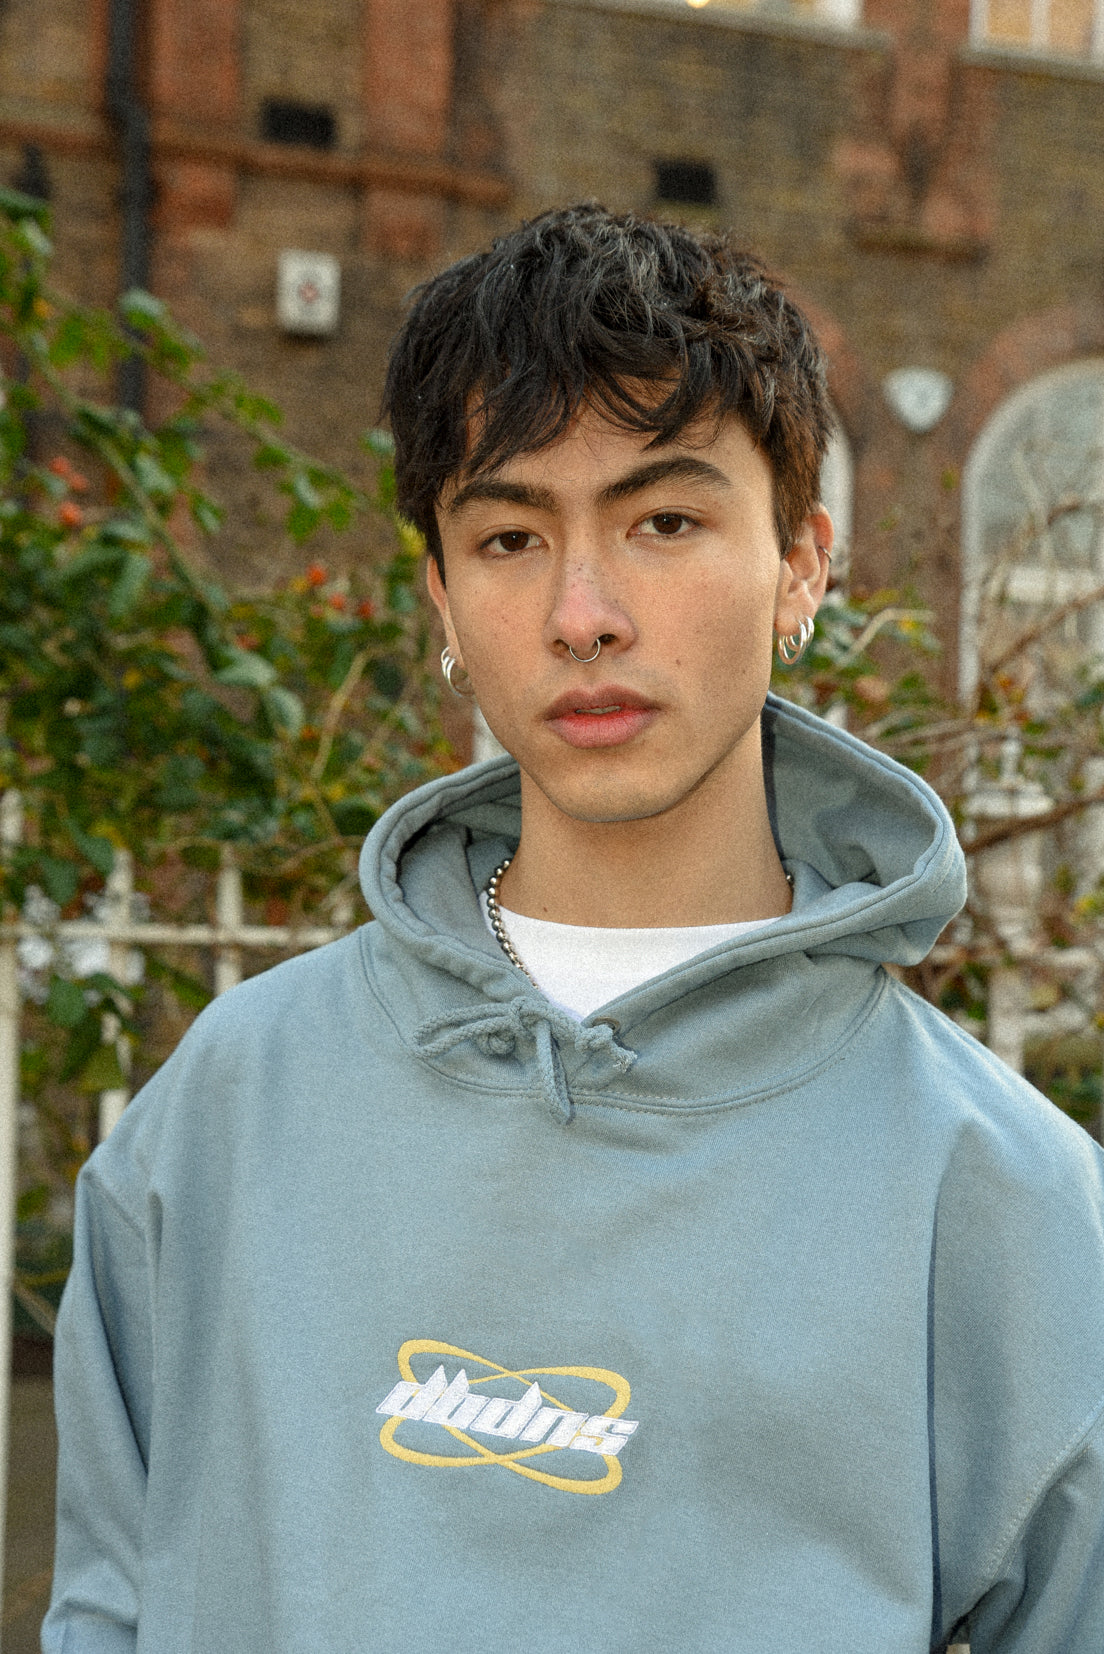 Hoodie in Dusty Blue with Futuristic Logo Embroidery